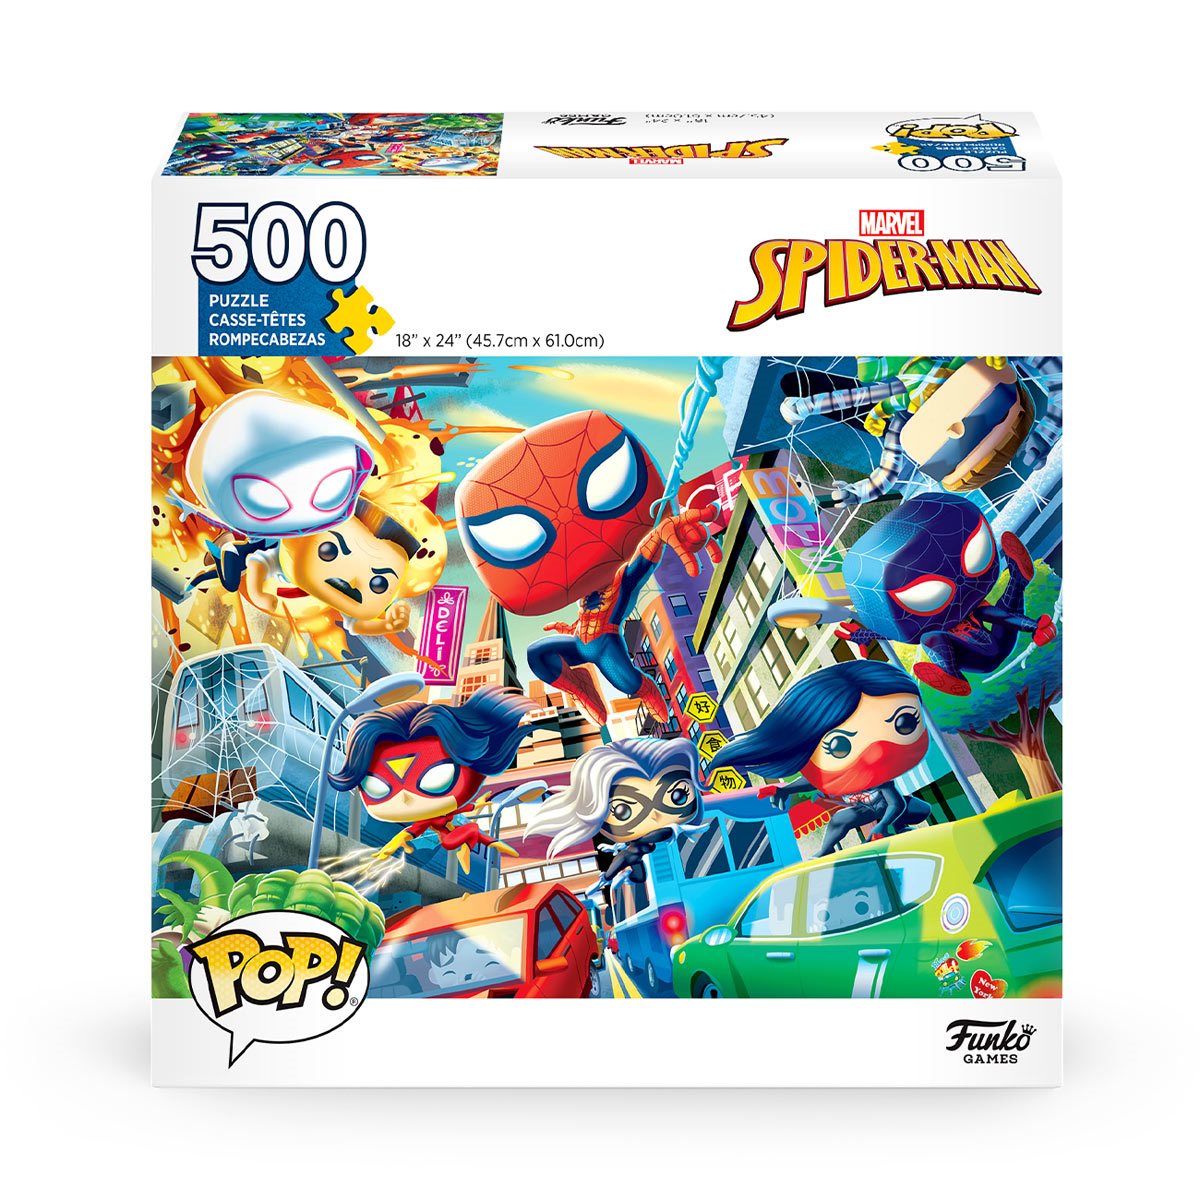 Spider-Man Villains 3,000 Piece Jigsaw Puzzle with Character Key